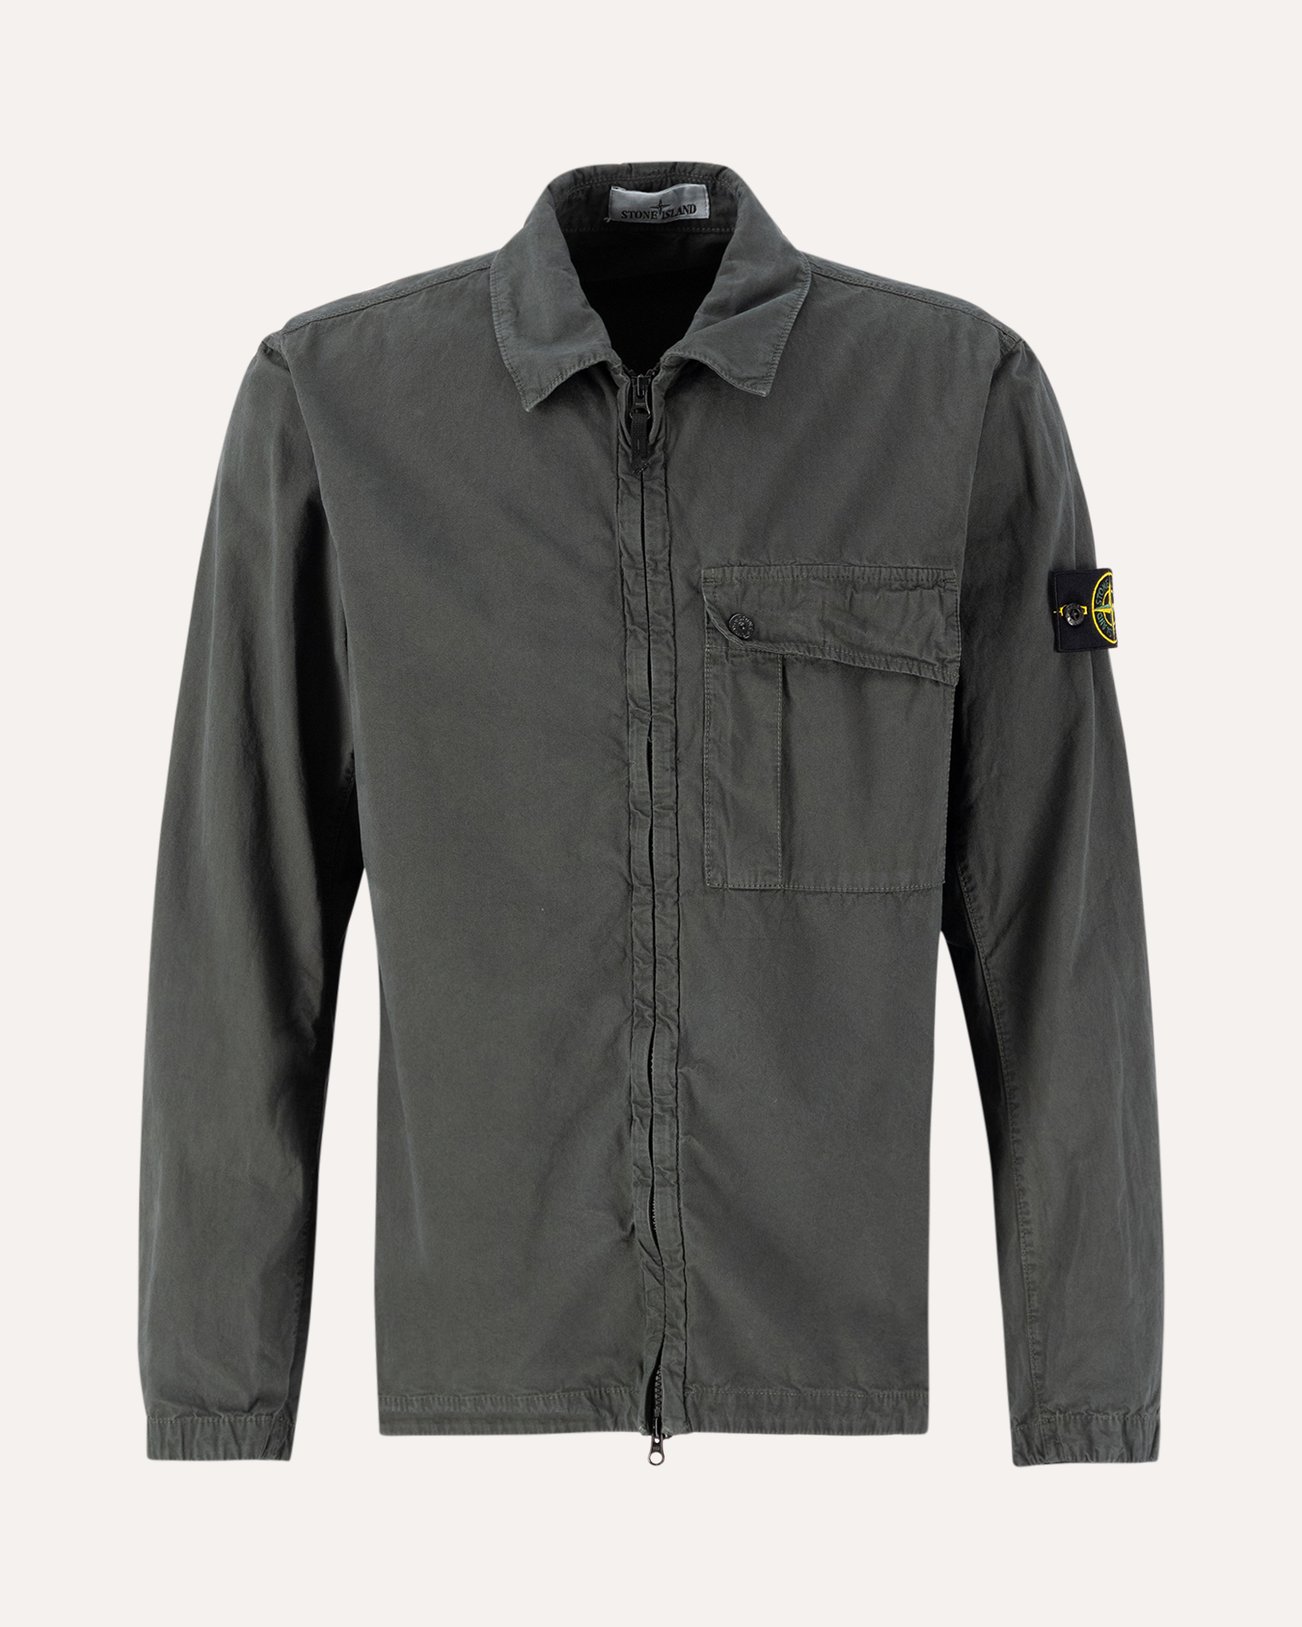 Stone Island 119WN Brushed Organic Cotton Canvas Garment Dyed 'Old' Effect Overshirt GROEN 1